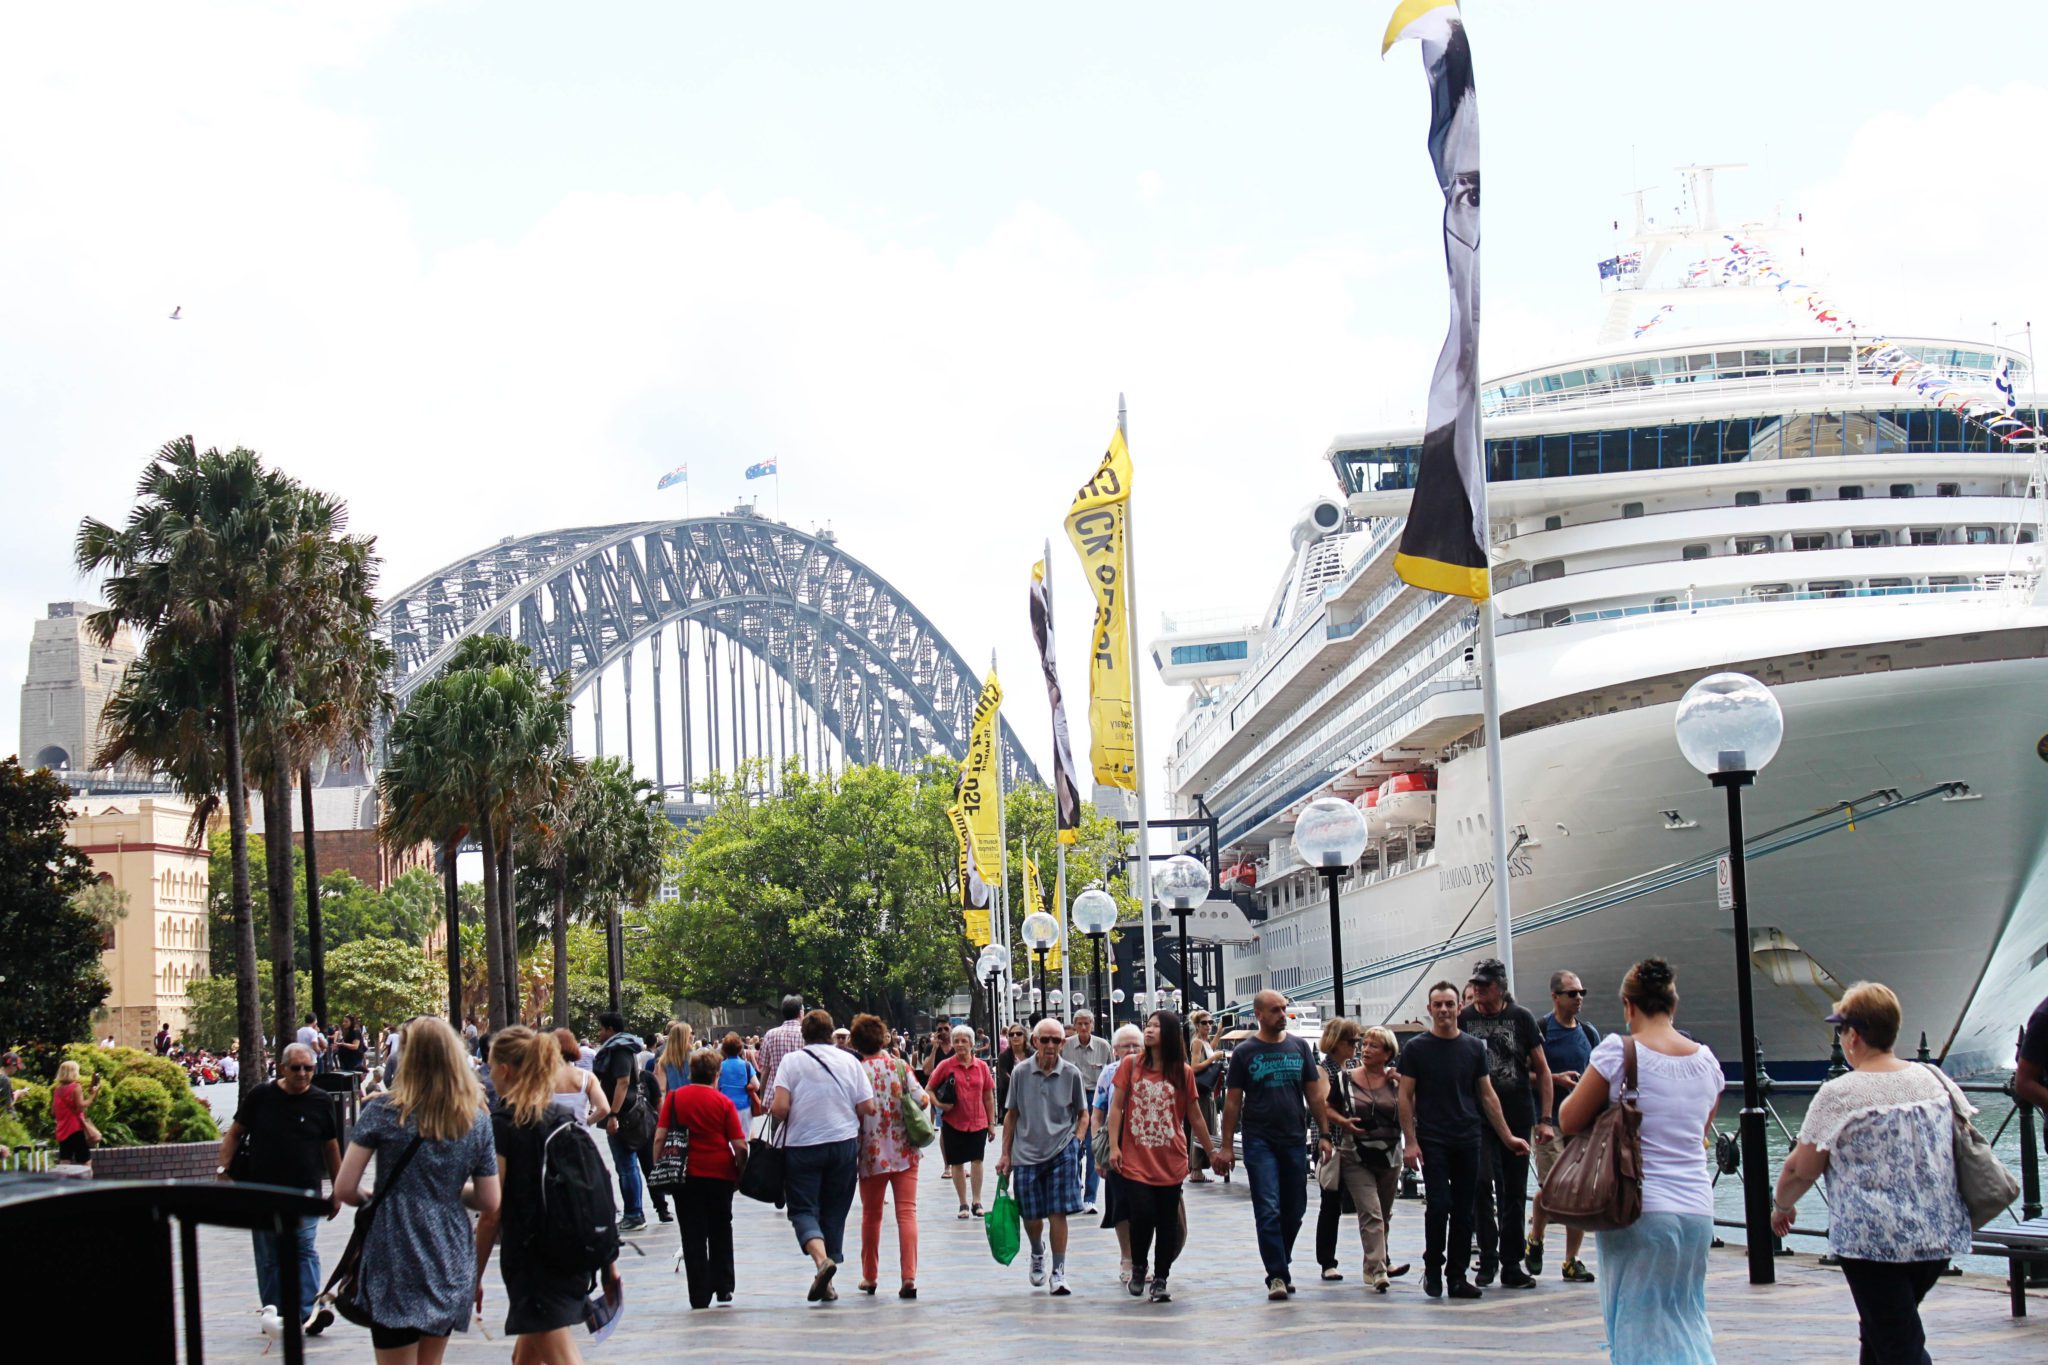 Best things to do at Circular Quay- Top 10 things to do in Sydney #sydney #australia #circularquay #simplywander